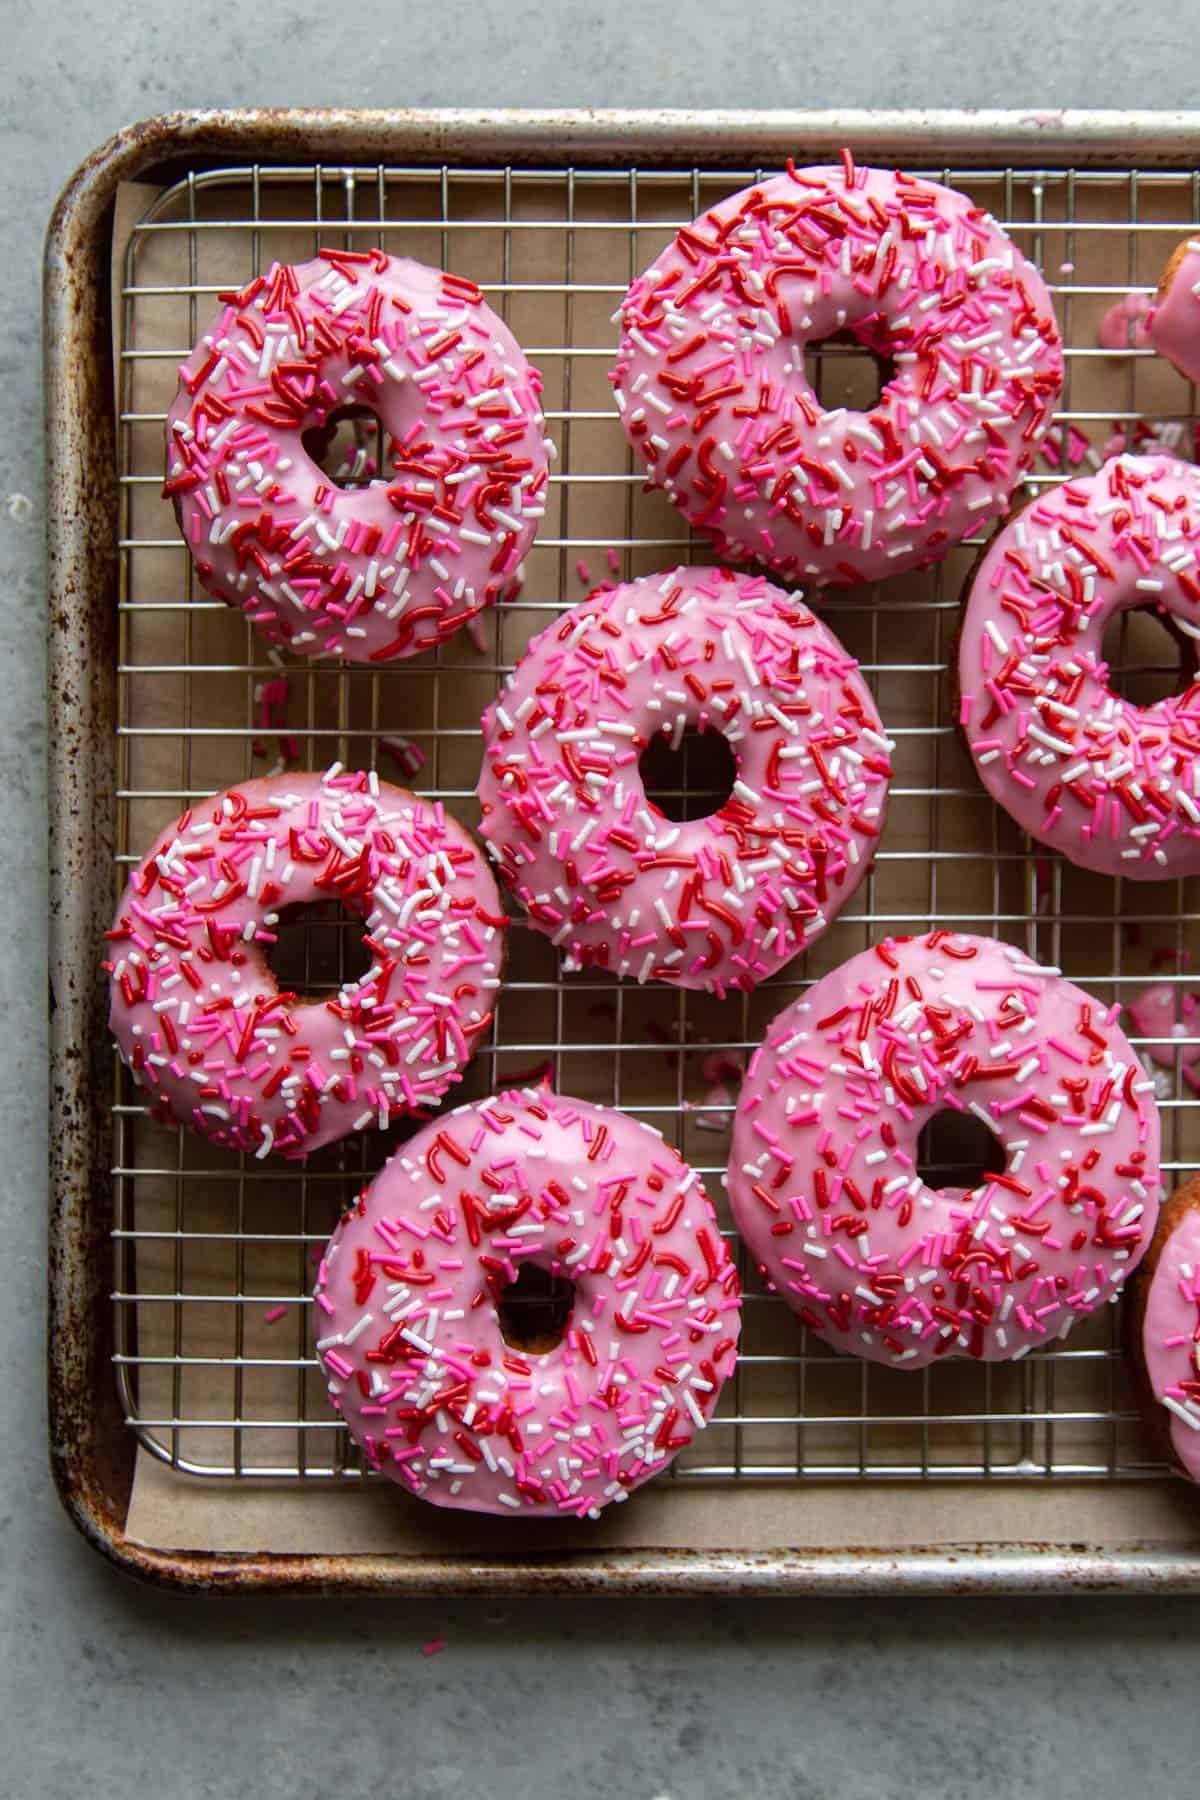 pink glazed donuts with valentine's sprinkles on wire rack. 